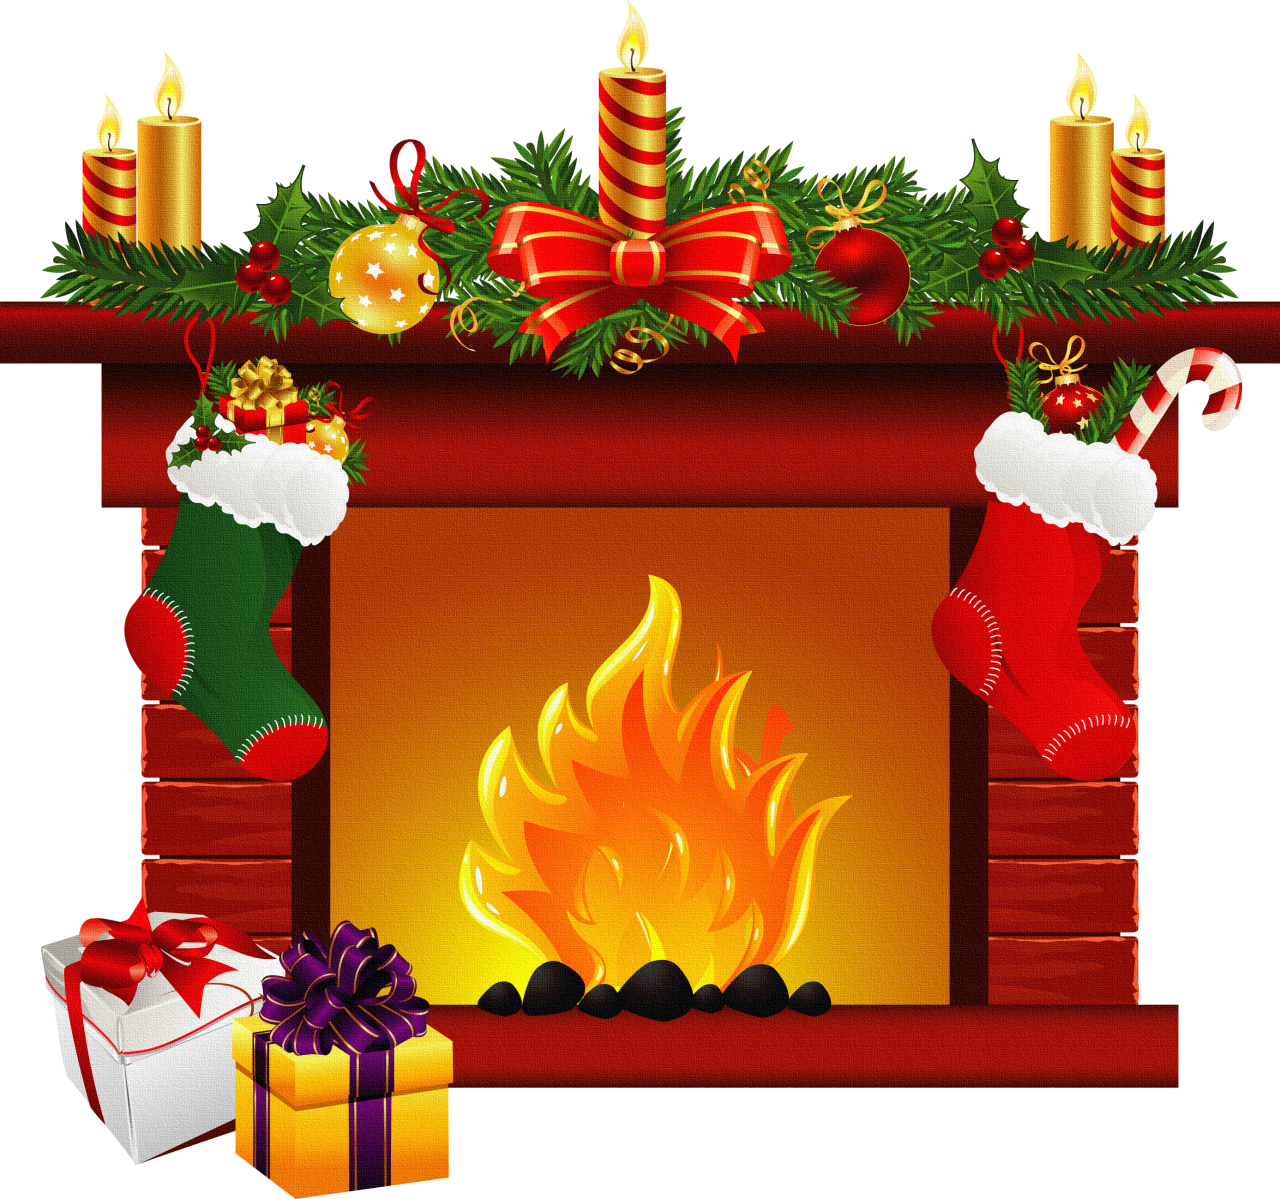 Fireplace clipart 2